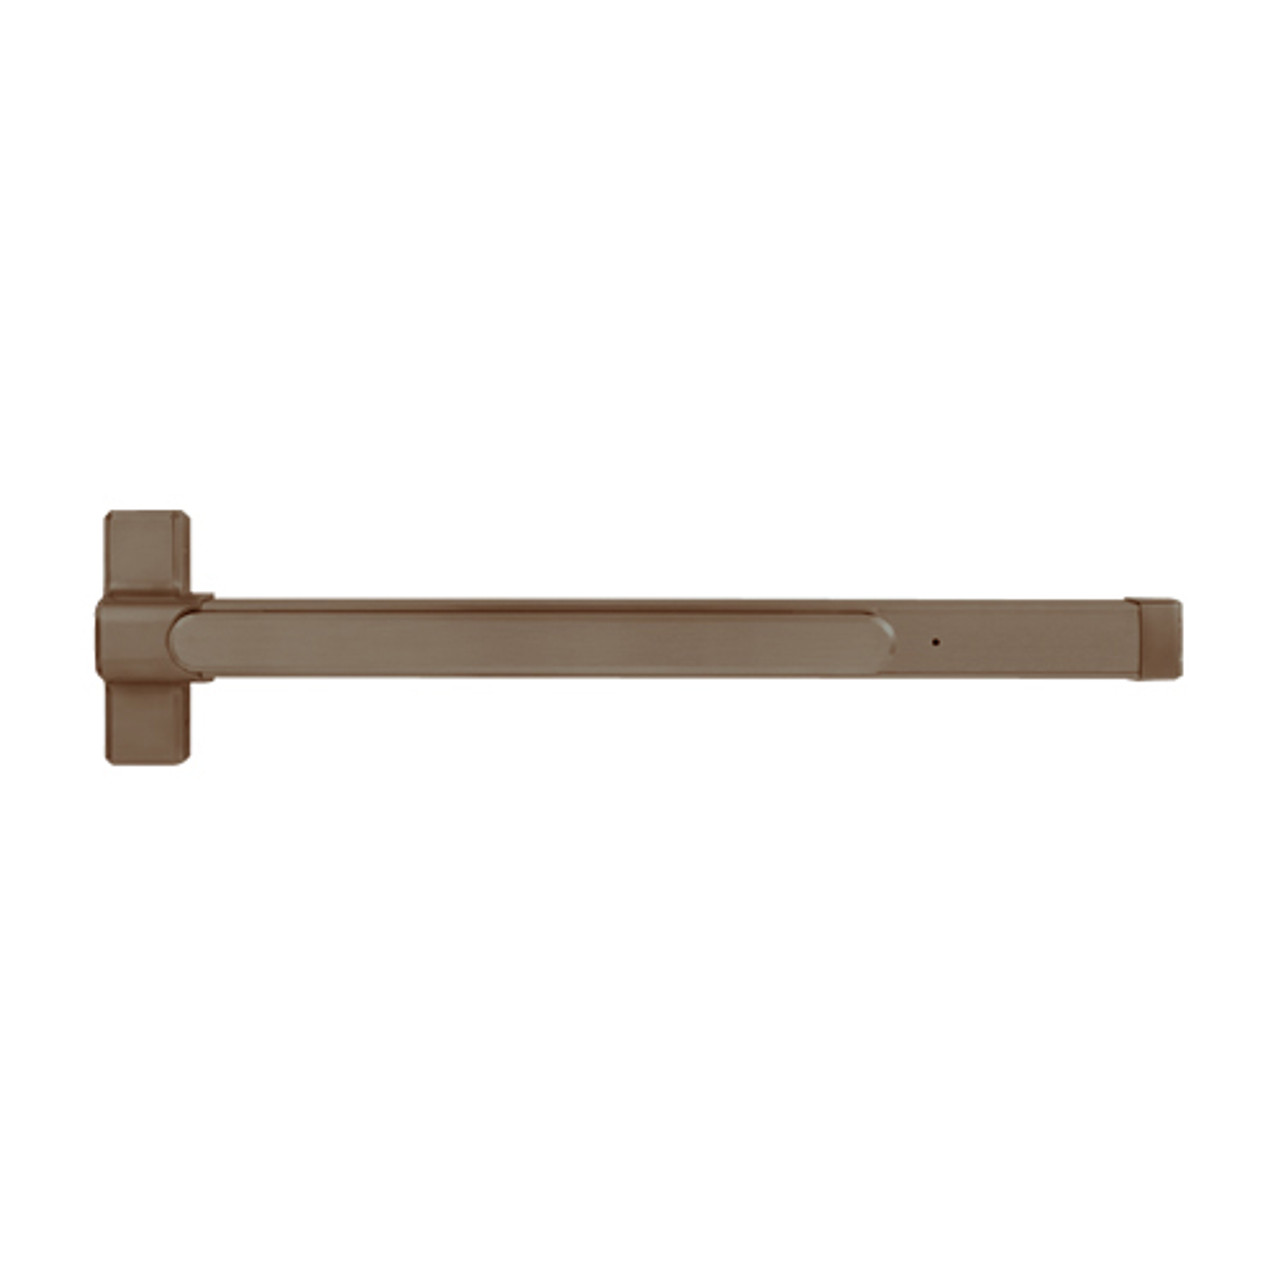 QED129LRX-48-7-313AN Stanley QED100 Series Heavy Duty Concealed Vertical Rod Fire Rated Exit Device in Anodized Duranodic Bronze Finish